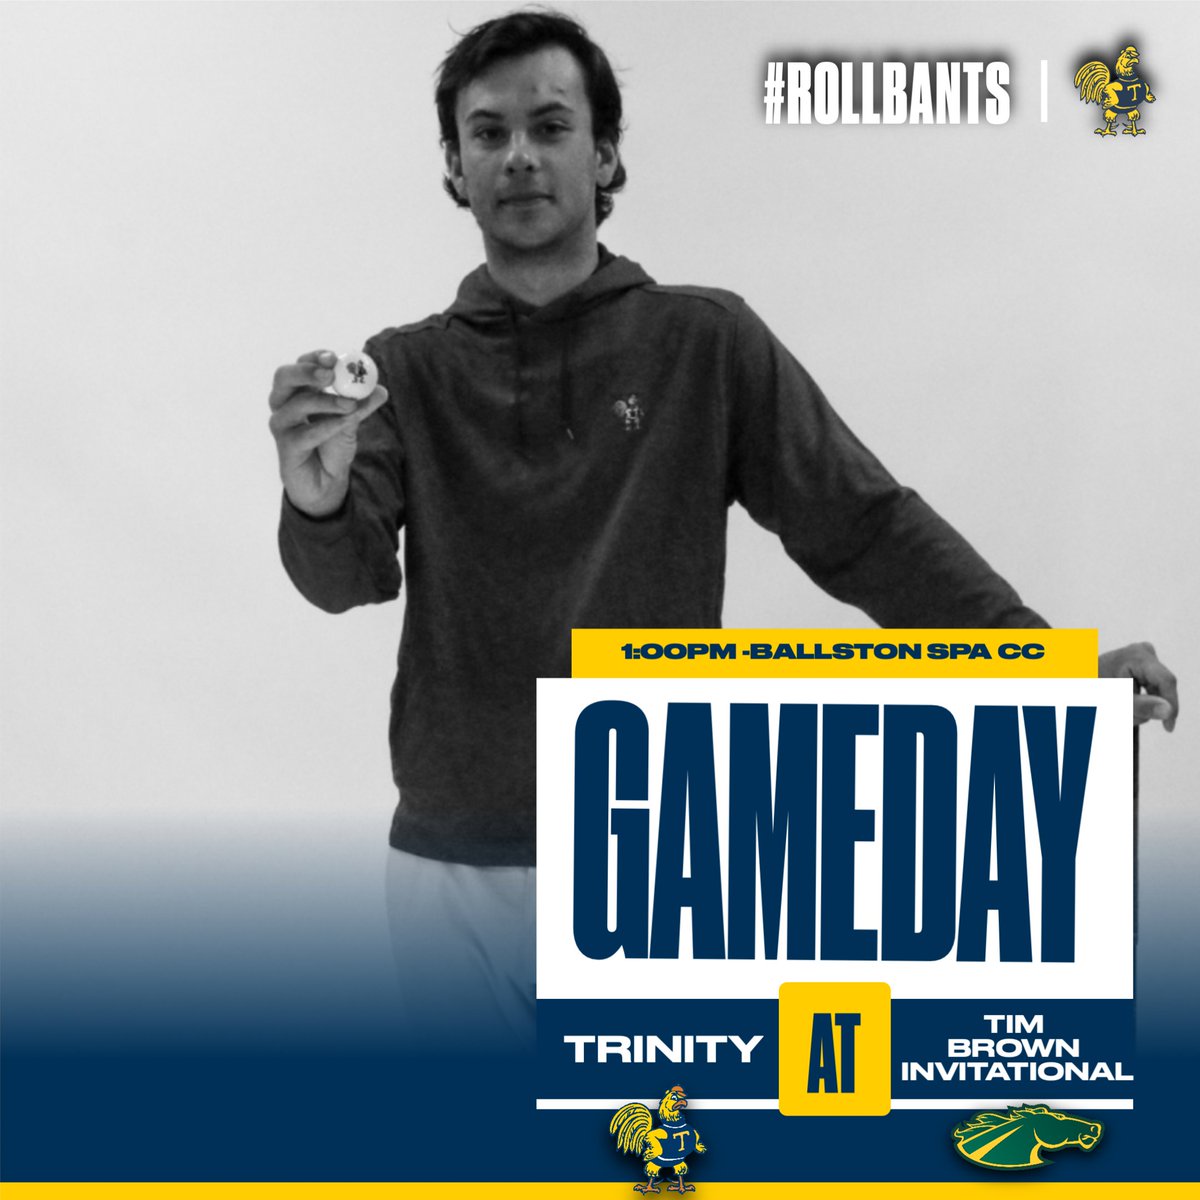 MG🏌️| Trinity Men's golf compete in the Time Brown Invitational hosted by Skidmore College at Ballston Spa Country Club, the round will begin at 1:30Pm with a shotgun start #RollBants🐓 📊 results.golfstat.com/public/leaderb…